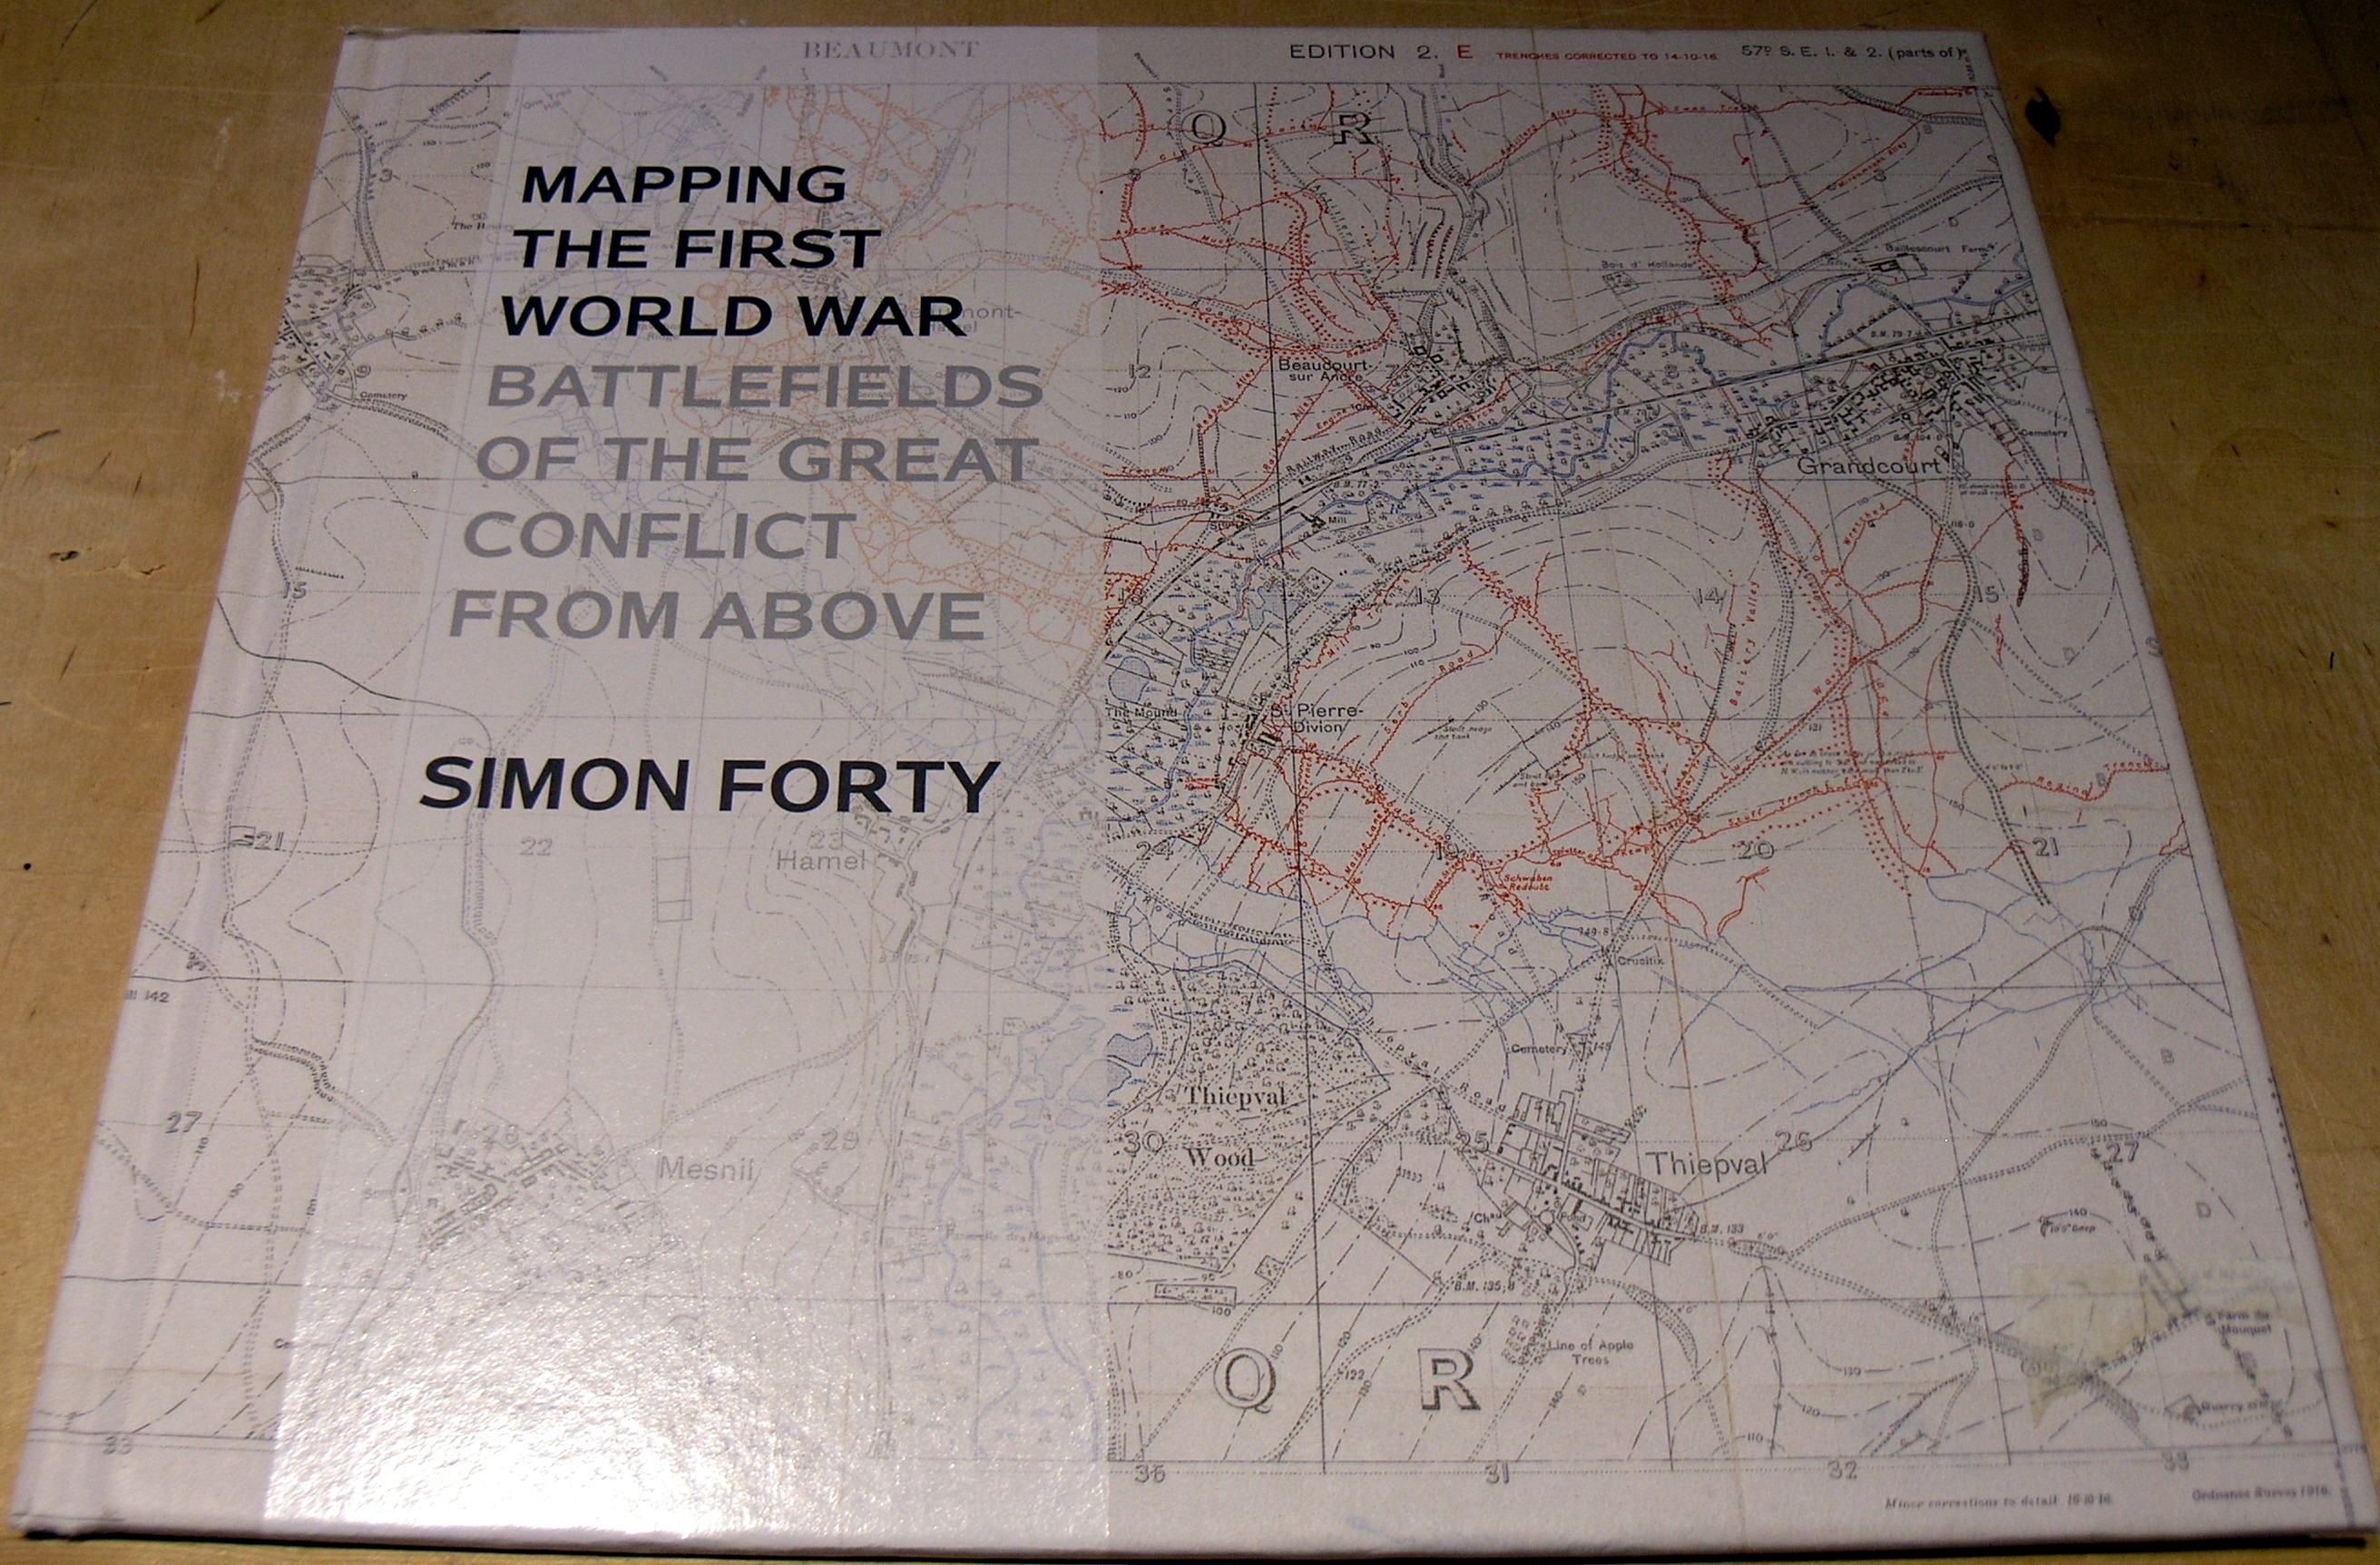 Mapping The First World War: Battlefields of the Great Conflict from Above